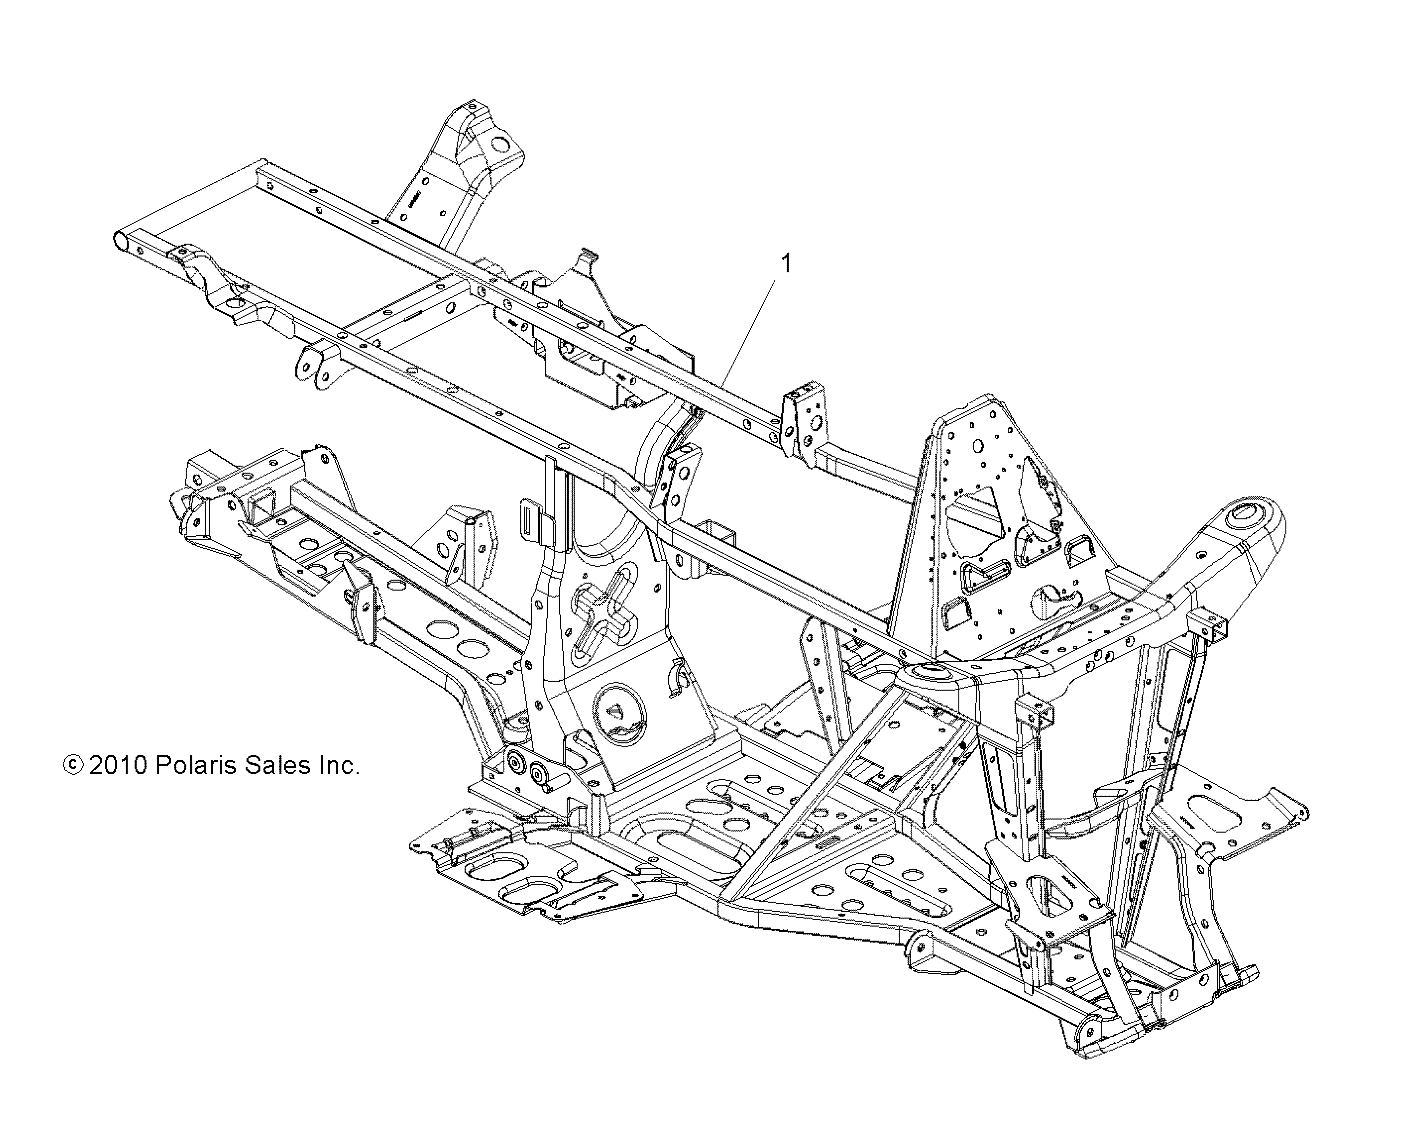 CHASSIS, FRAME - A13MB46FZ (49ATVFRAME11SP500)